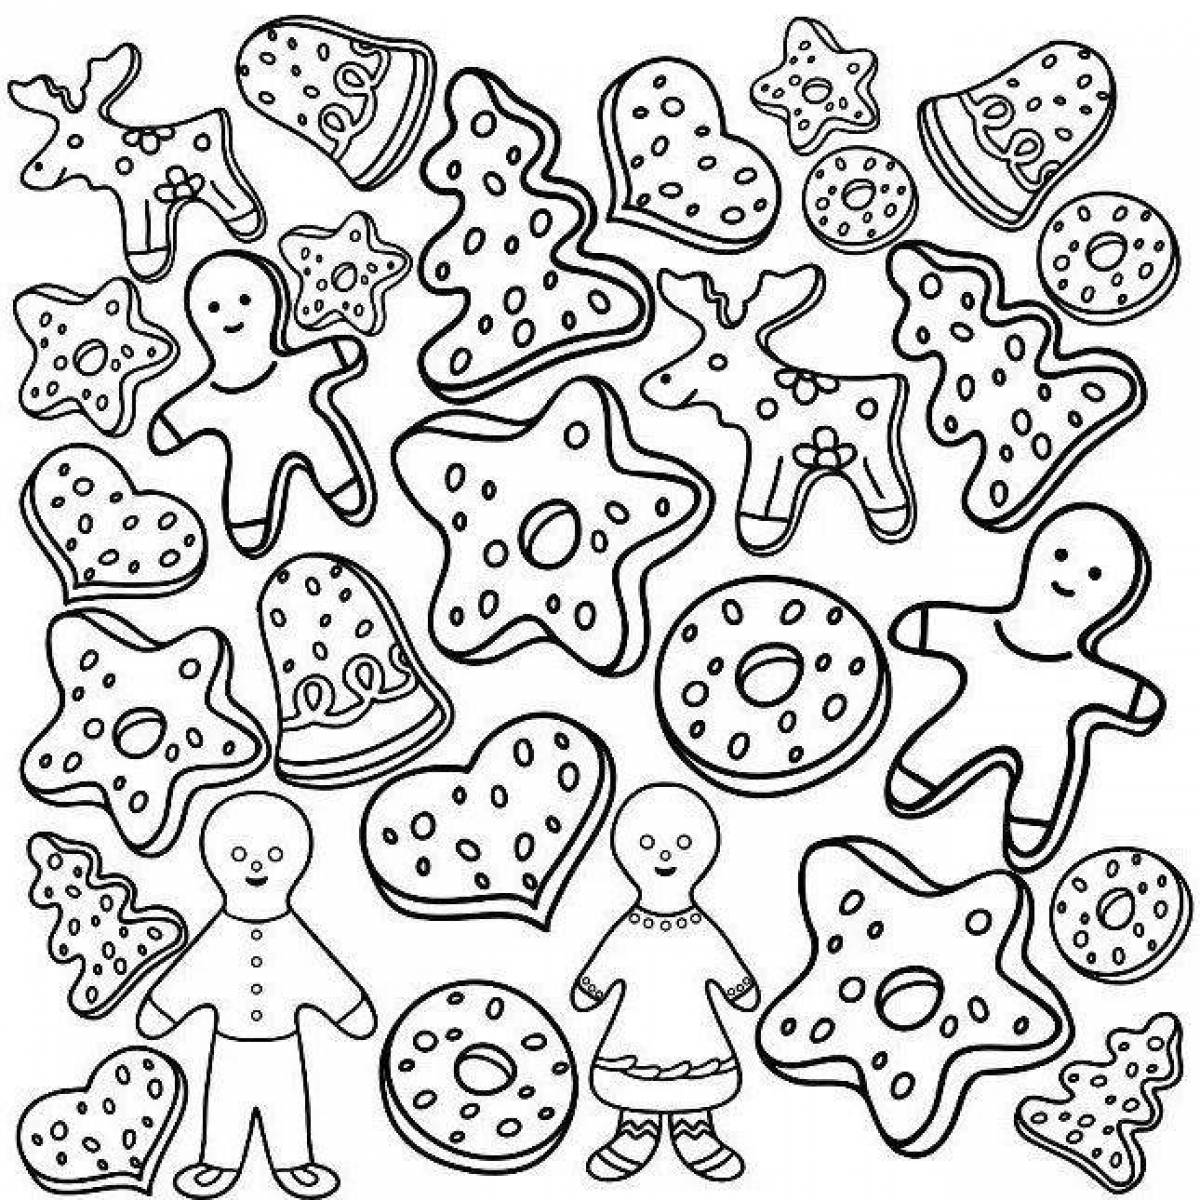 Colourful gingerbread coloring page